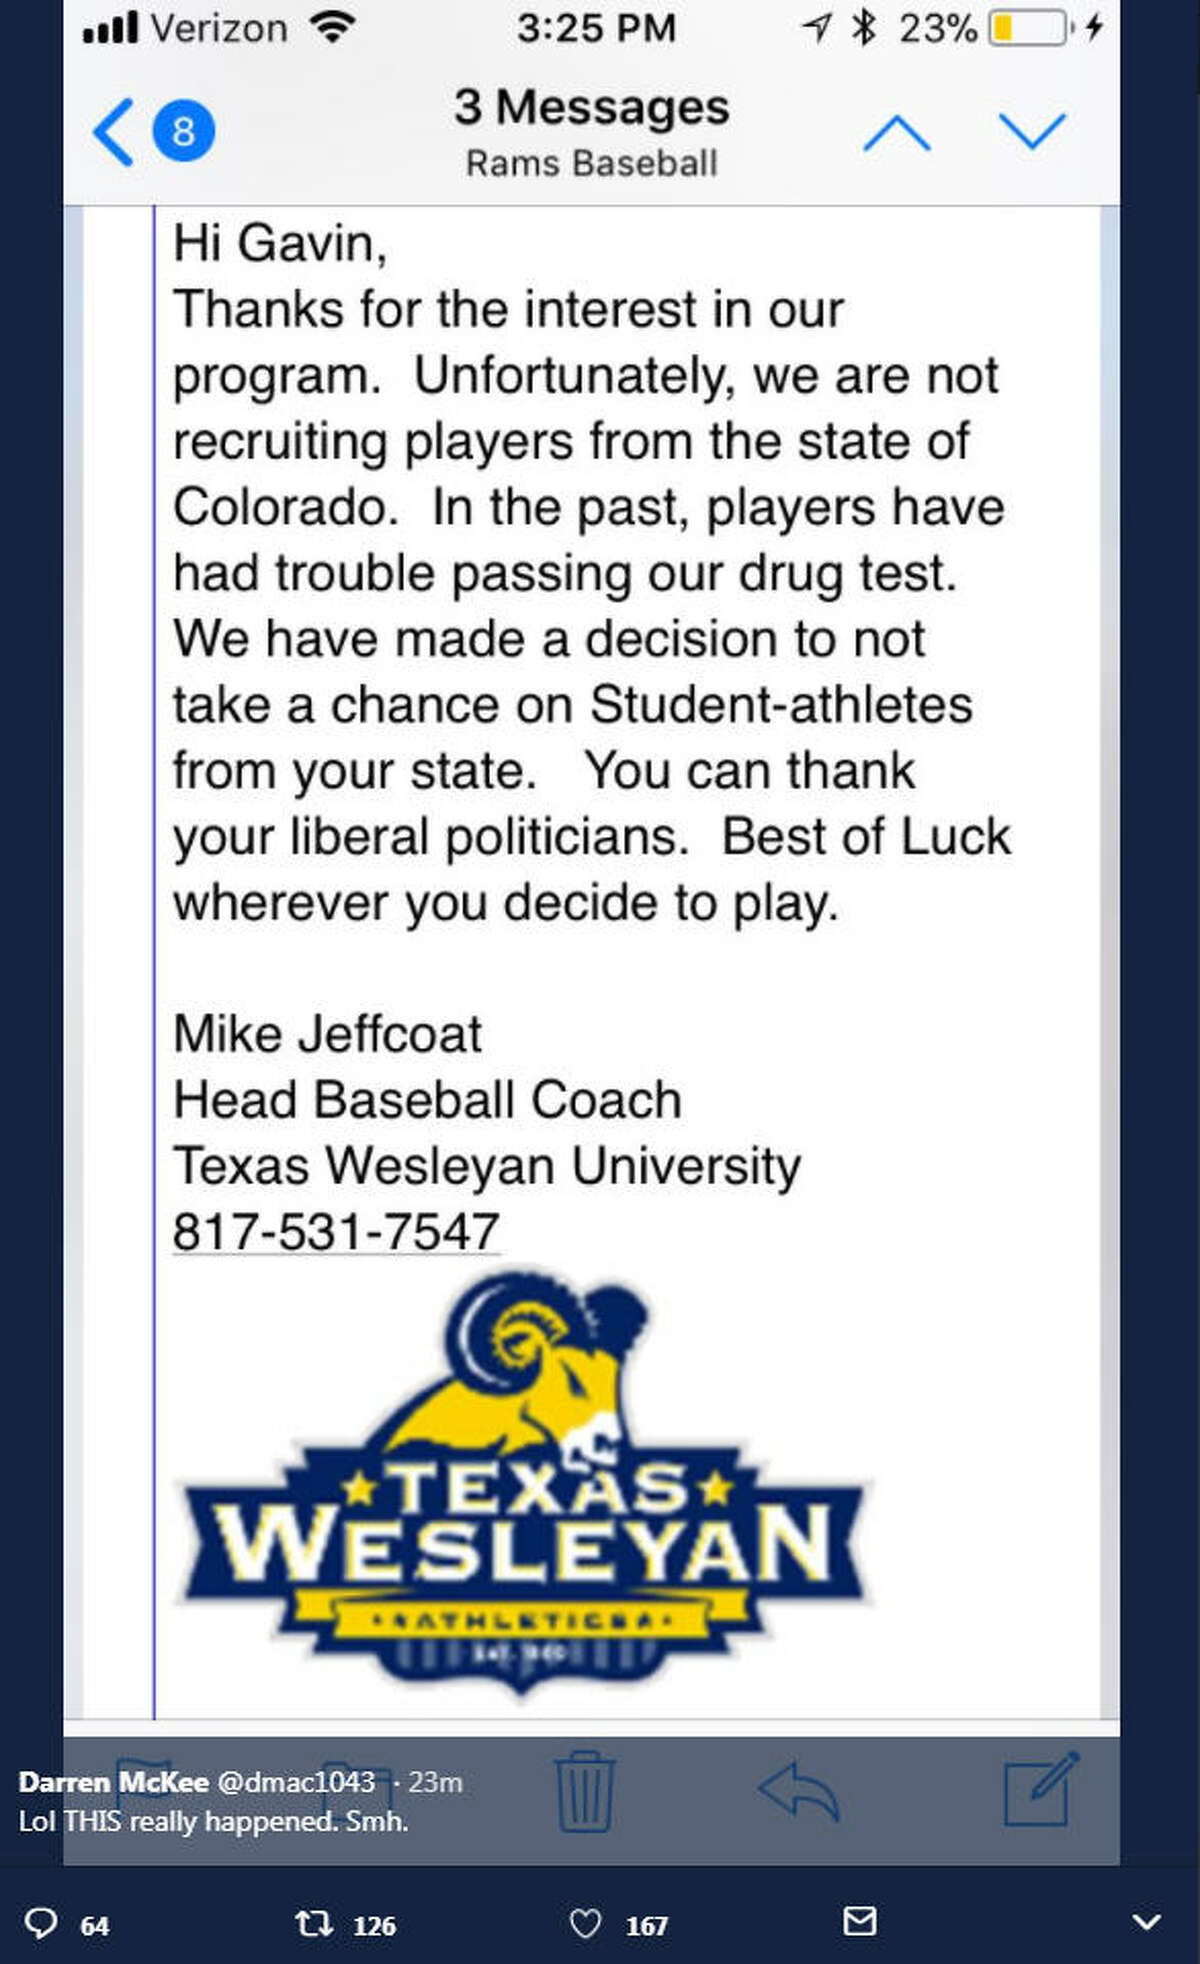 Texas Wesleyan University baseball coach Mike Jeffcoat has drawn the ire of the internet for an email he sent to a potential recruit Feb. 20.